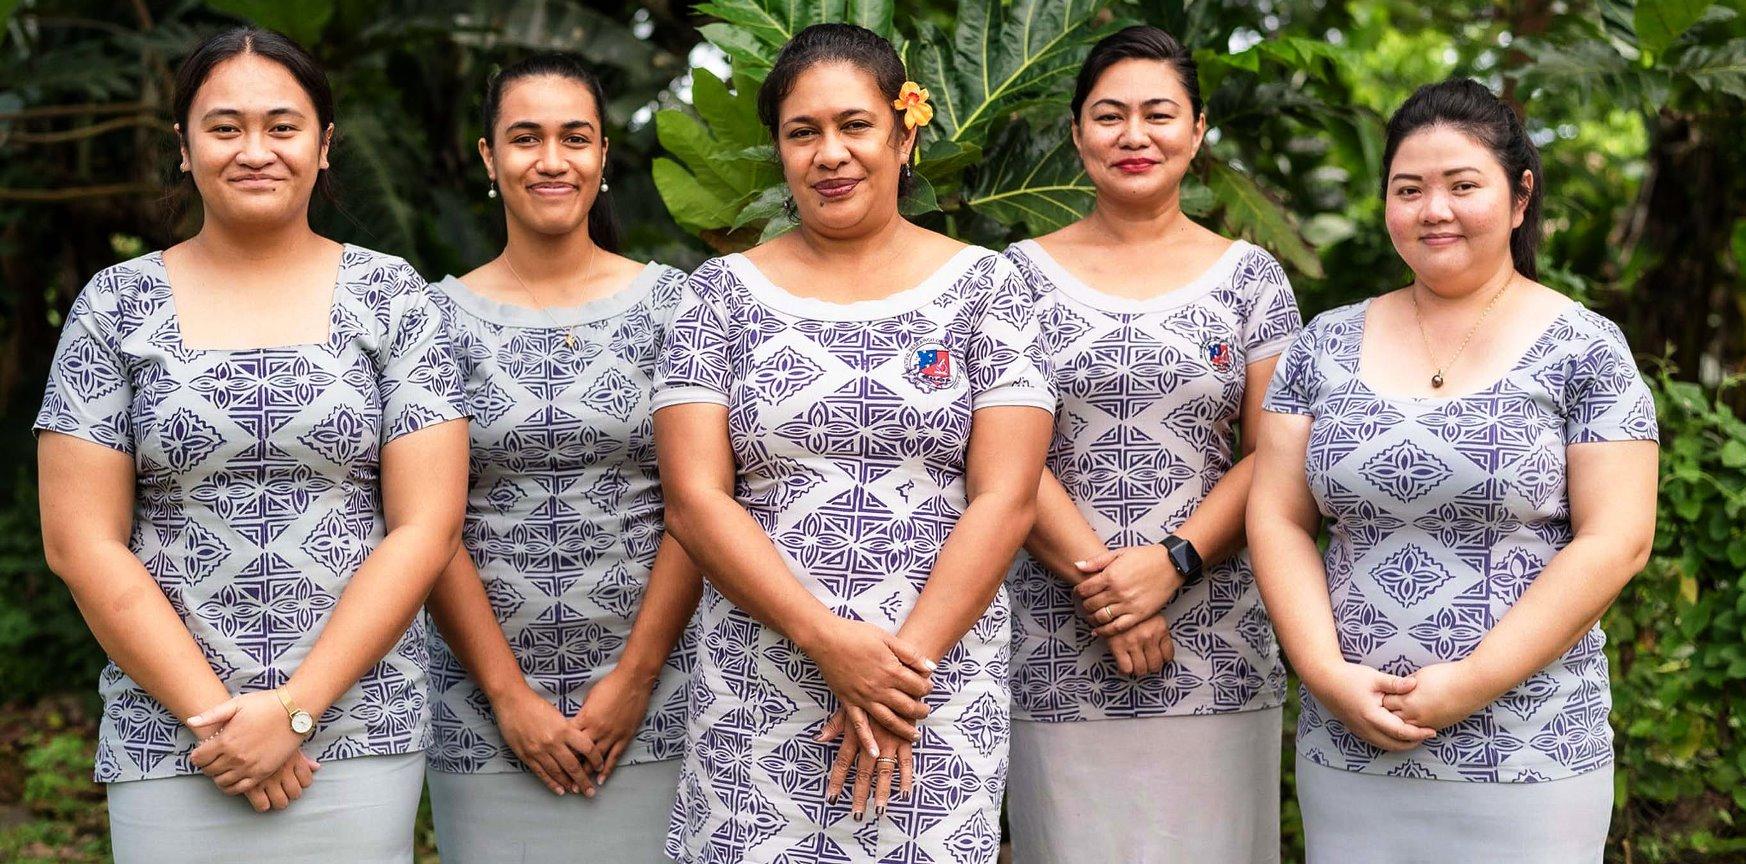 Some of Samoa's top female scientists working at SROS during yesterday's International Day for Women & Girls in Science.